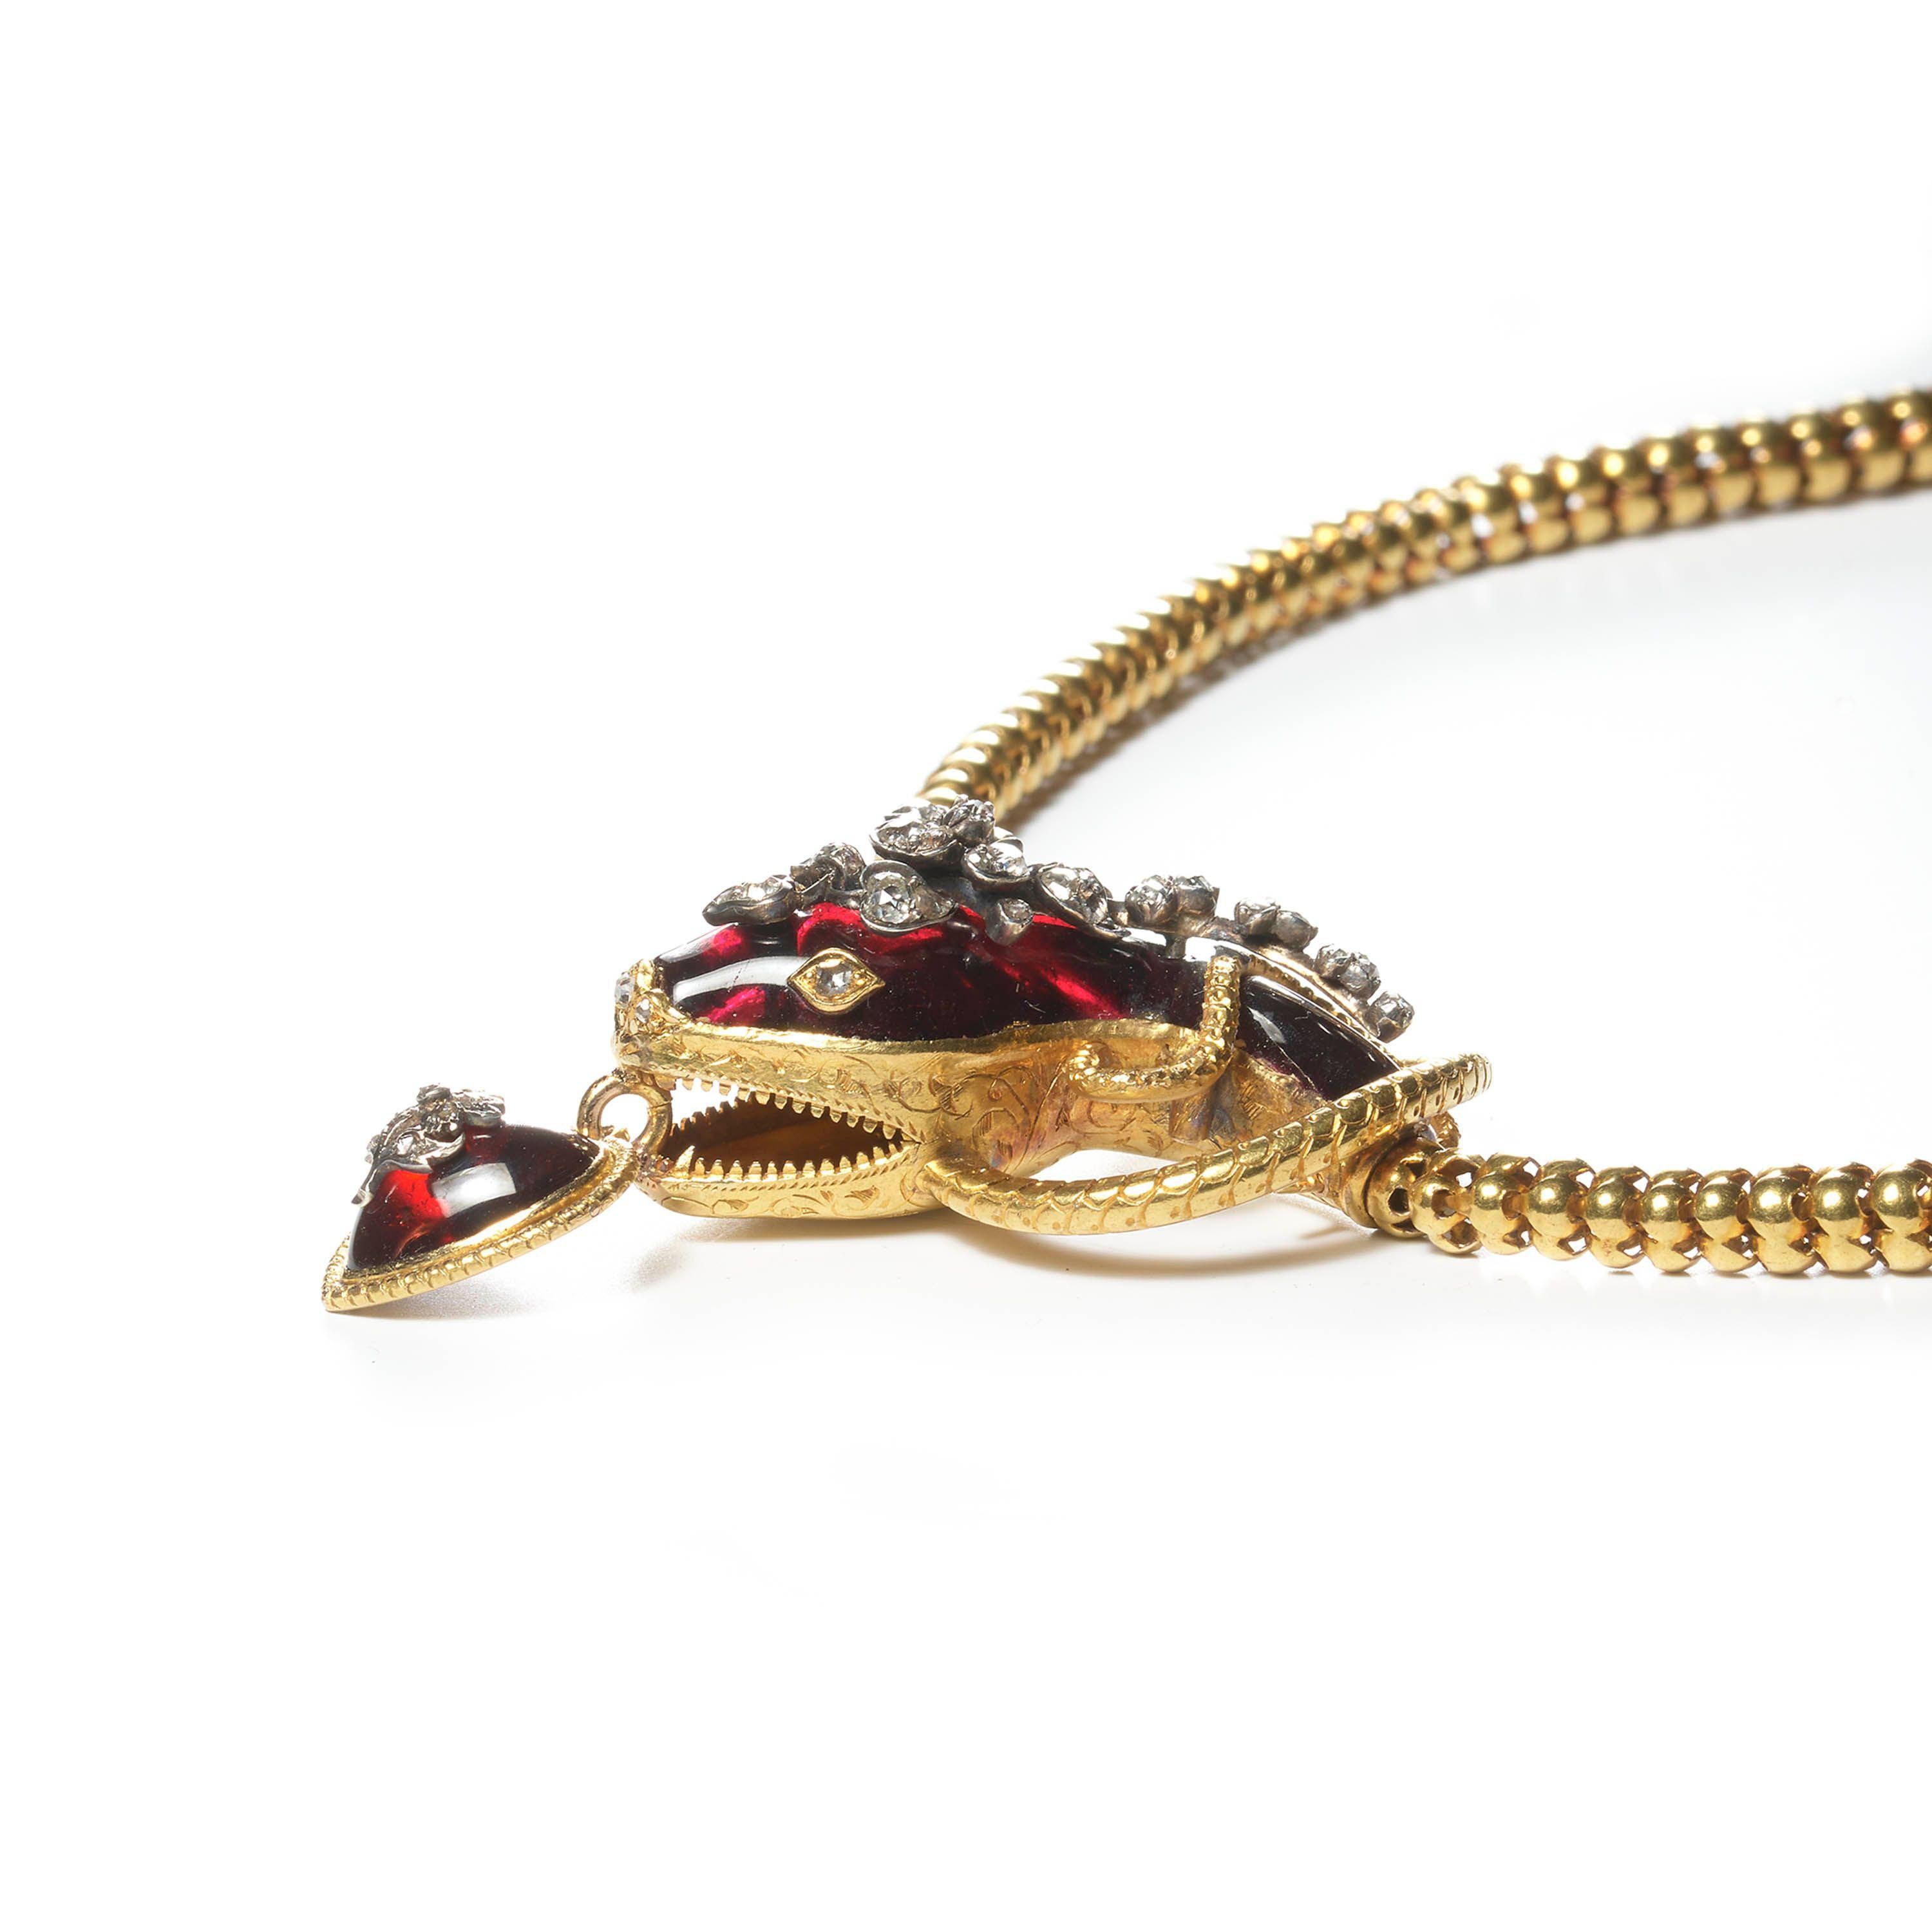 A Victorian garnet and diamond snake necklace, with old-cut and rose-cut diamonds, in a floral design, in silver settings, on a cabochon-cut garnet, forming the head, with a diamond set heart shaped garnet pendant, hanging from the open mouth, with